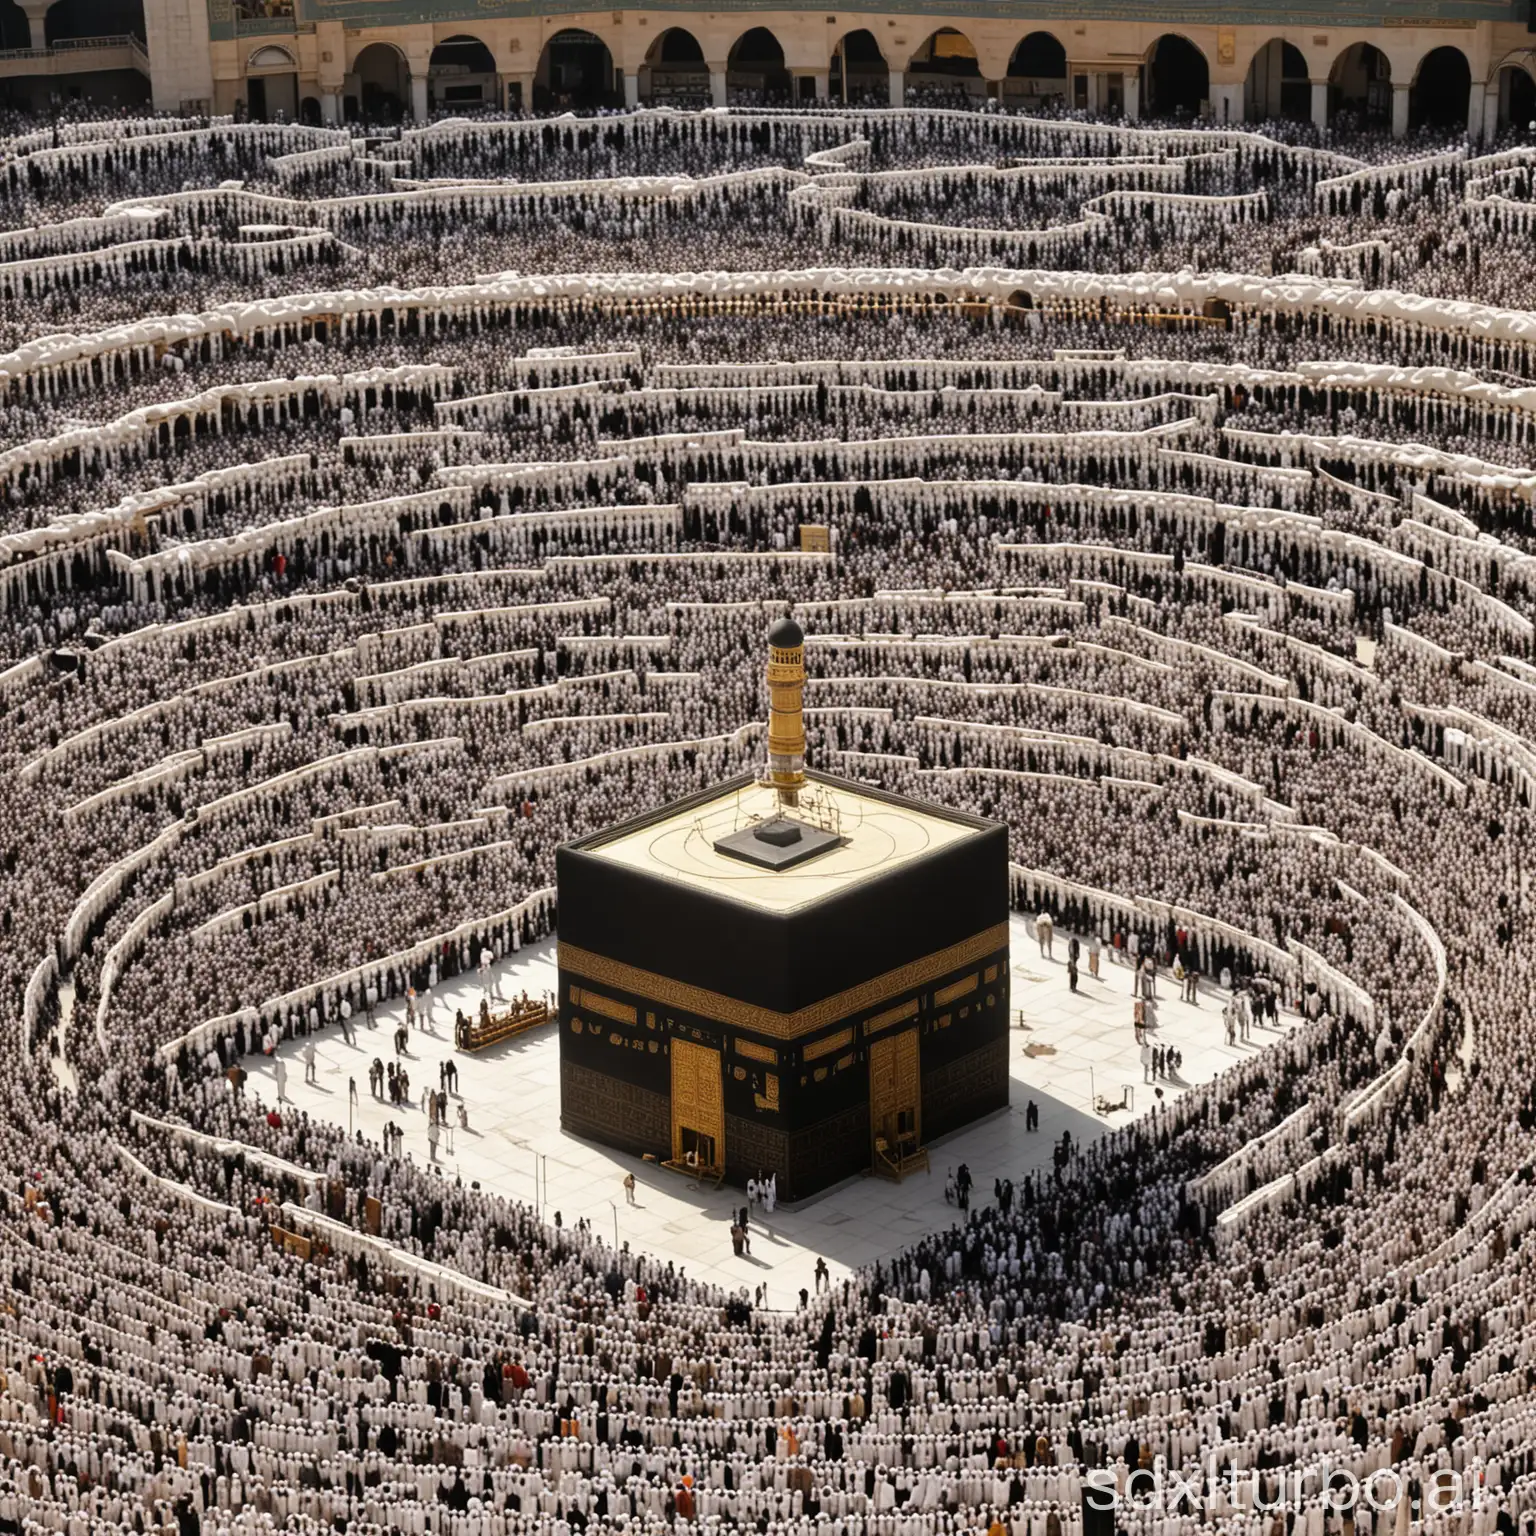 Pilgrims-Gathering-Around-the-Kaaba-for-Worship-in-Mecca